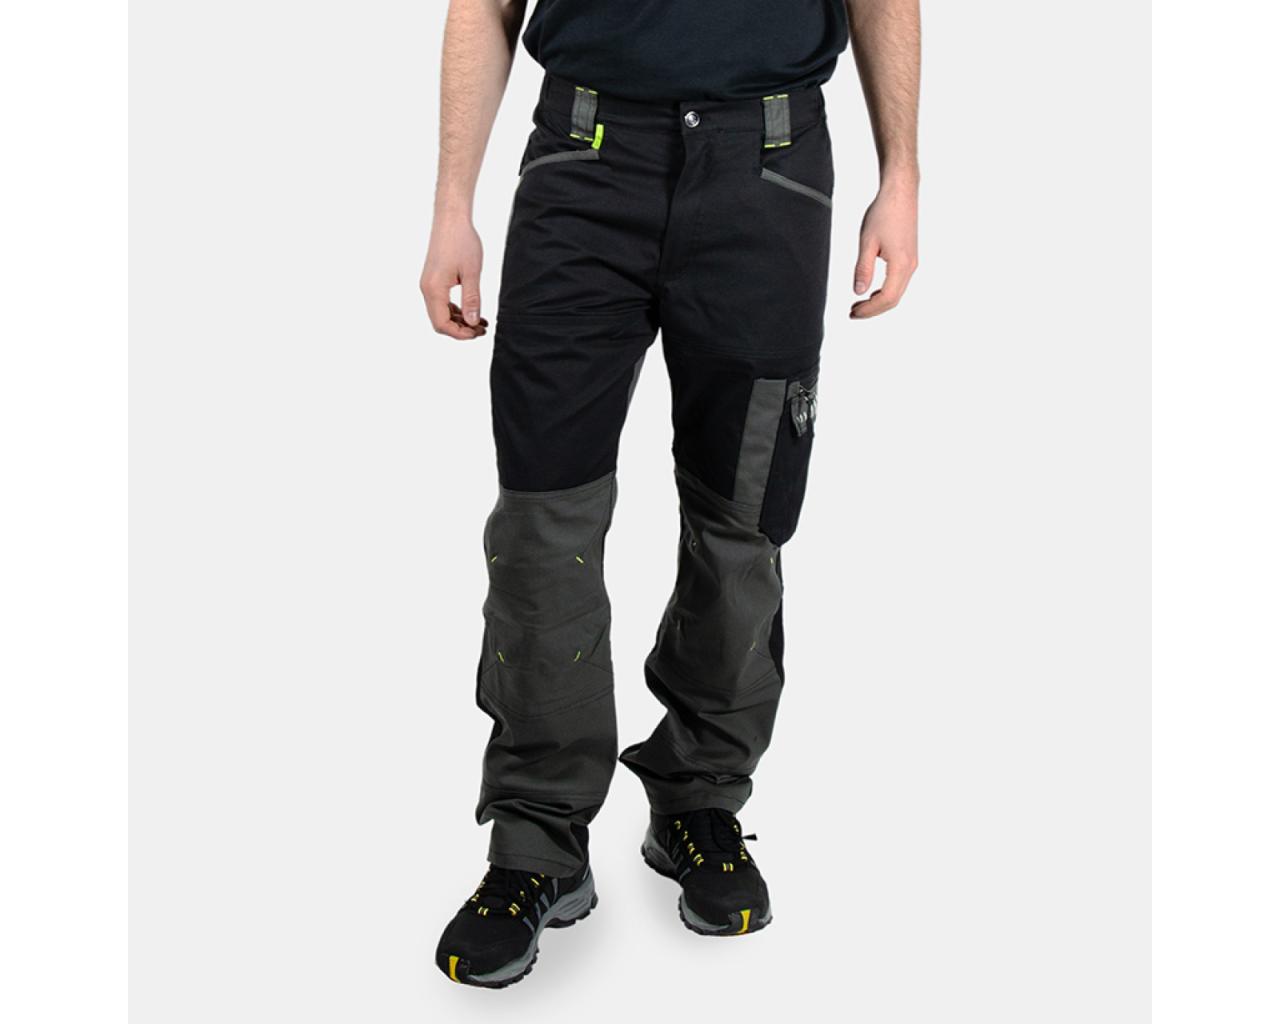 711 Pro Work Trousers Reviewed Awesome for Electricans and Plumbers   YouTube